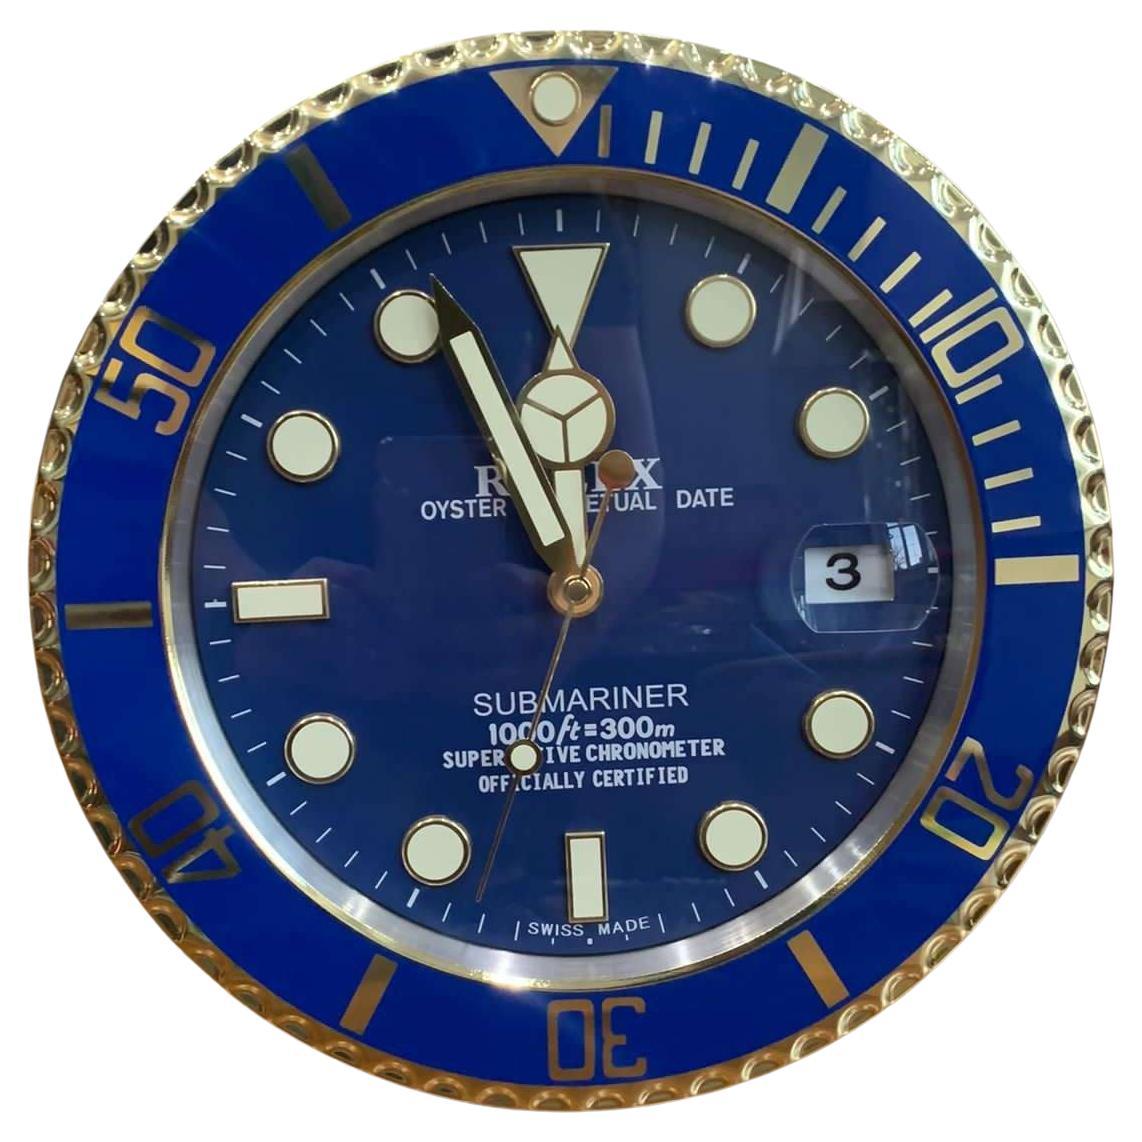 ROLEX Officially Certified Oyster Perpetual Submariner Blue & Gold Wall Clock 